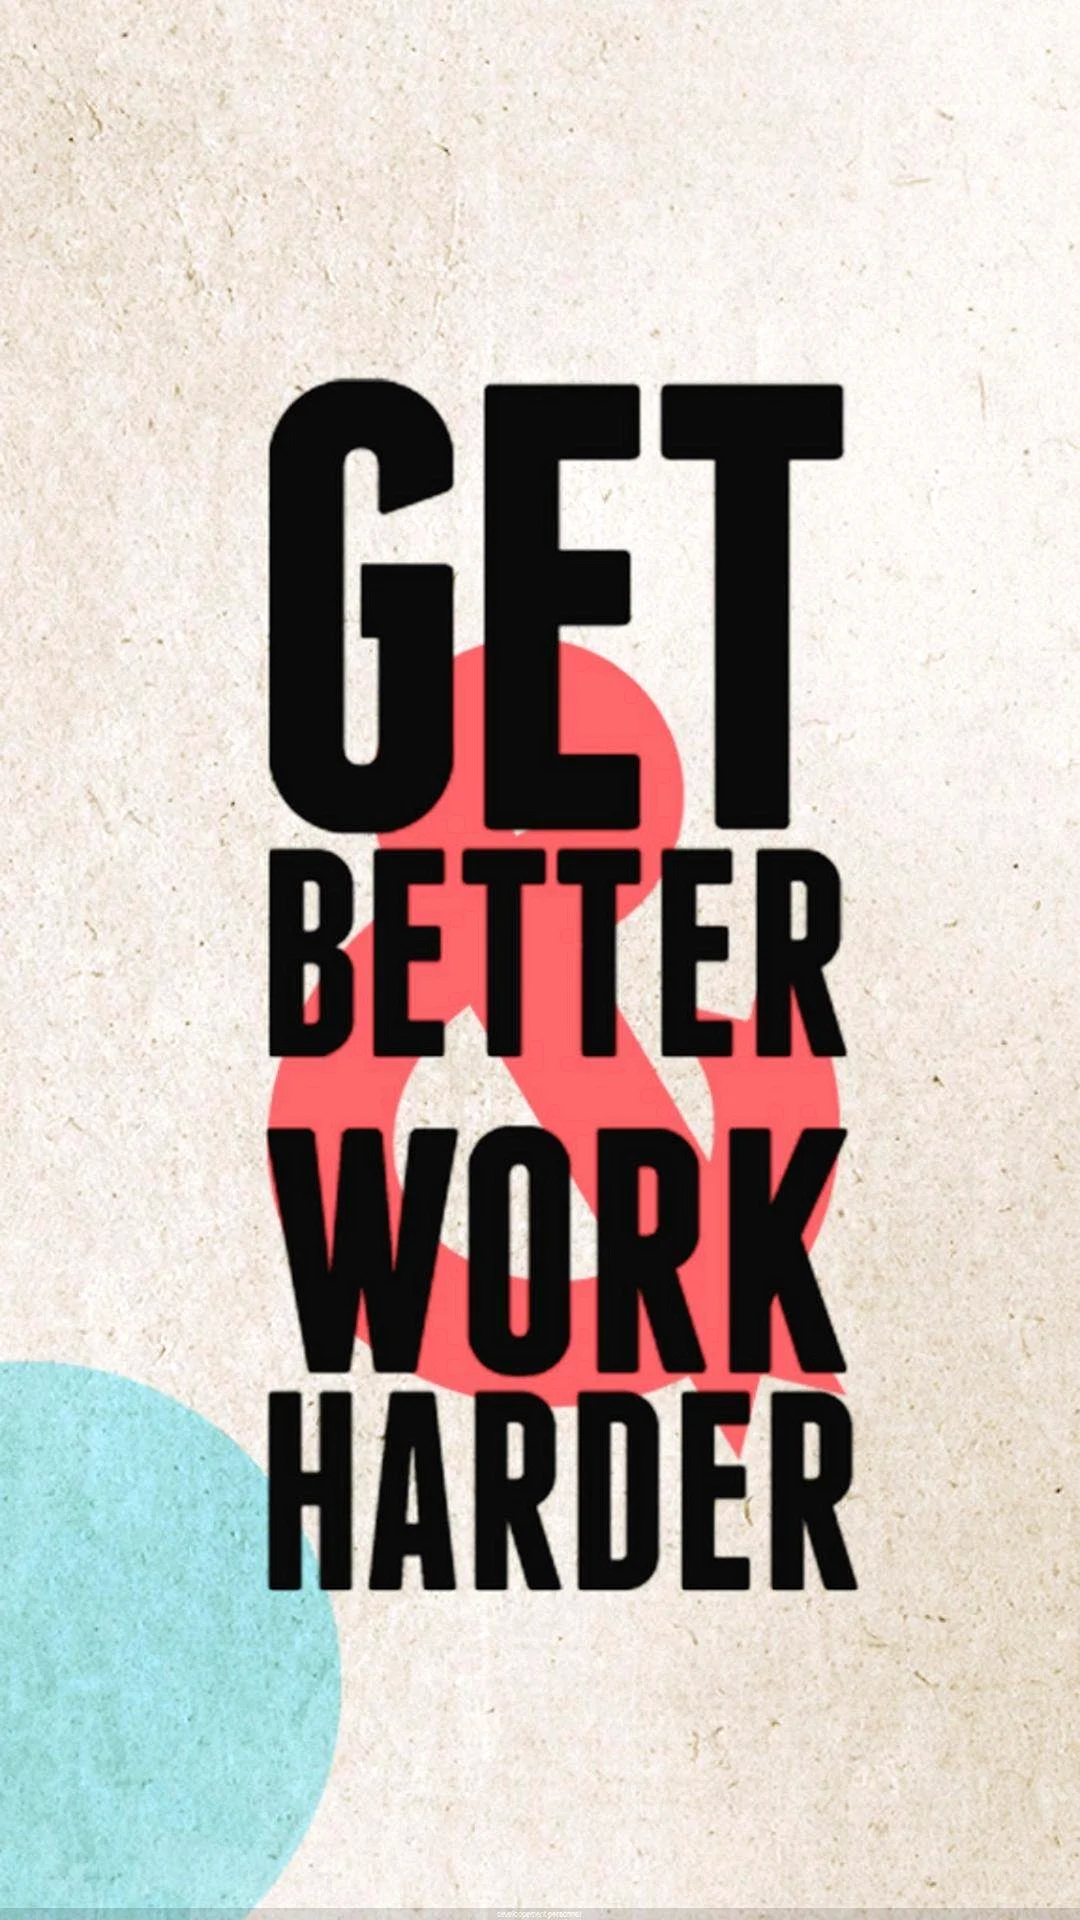 Hard Work Wallpaper For iPhone